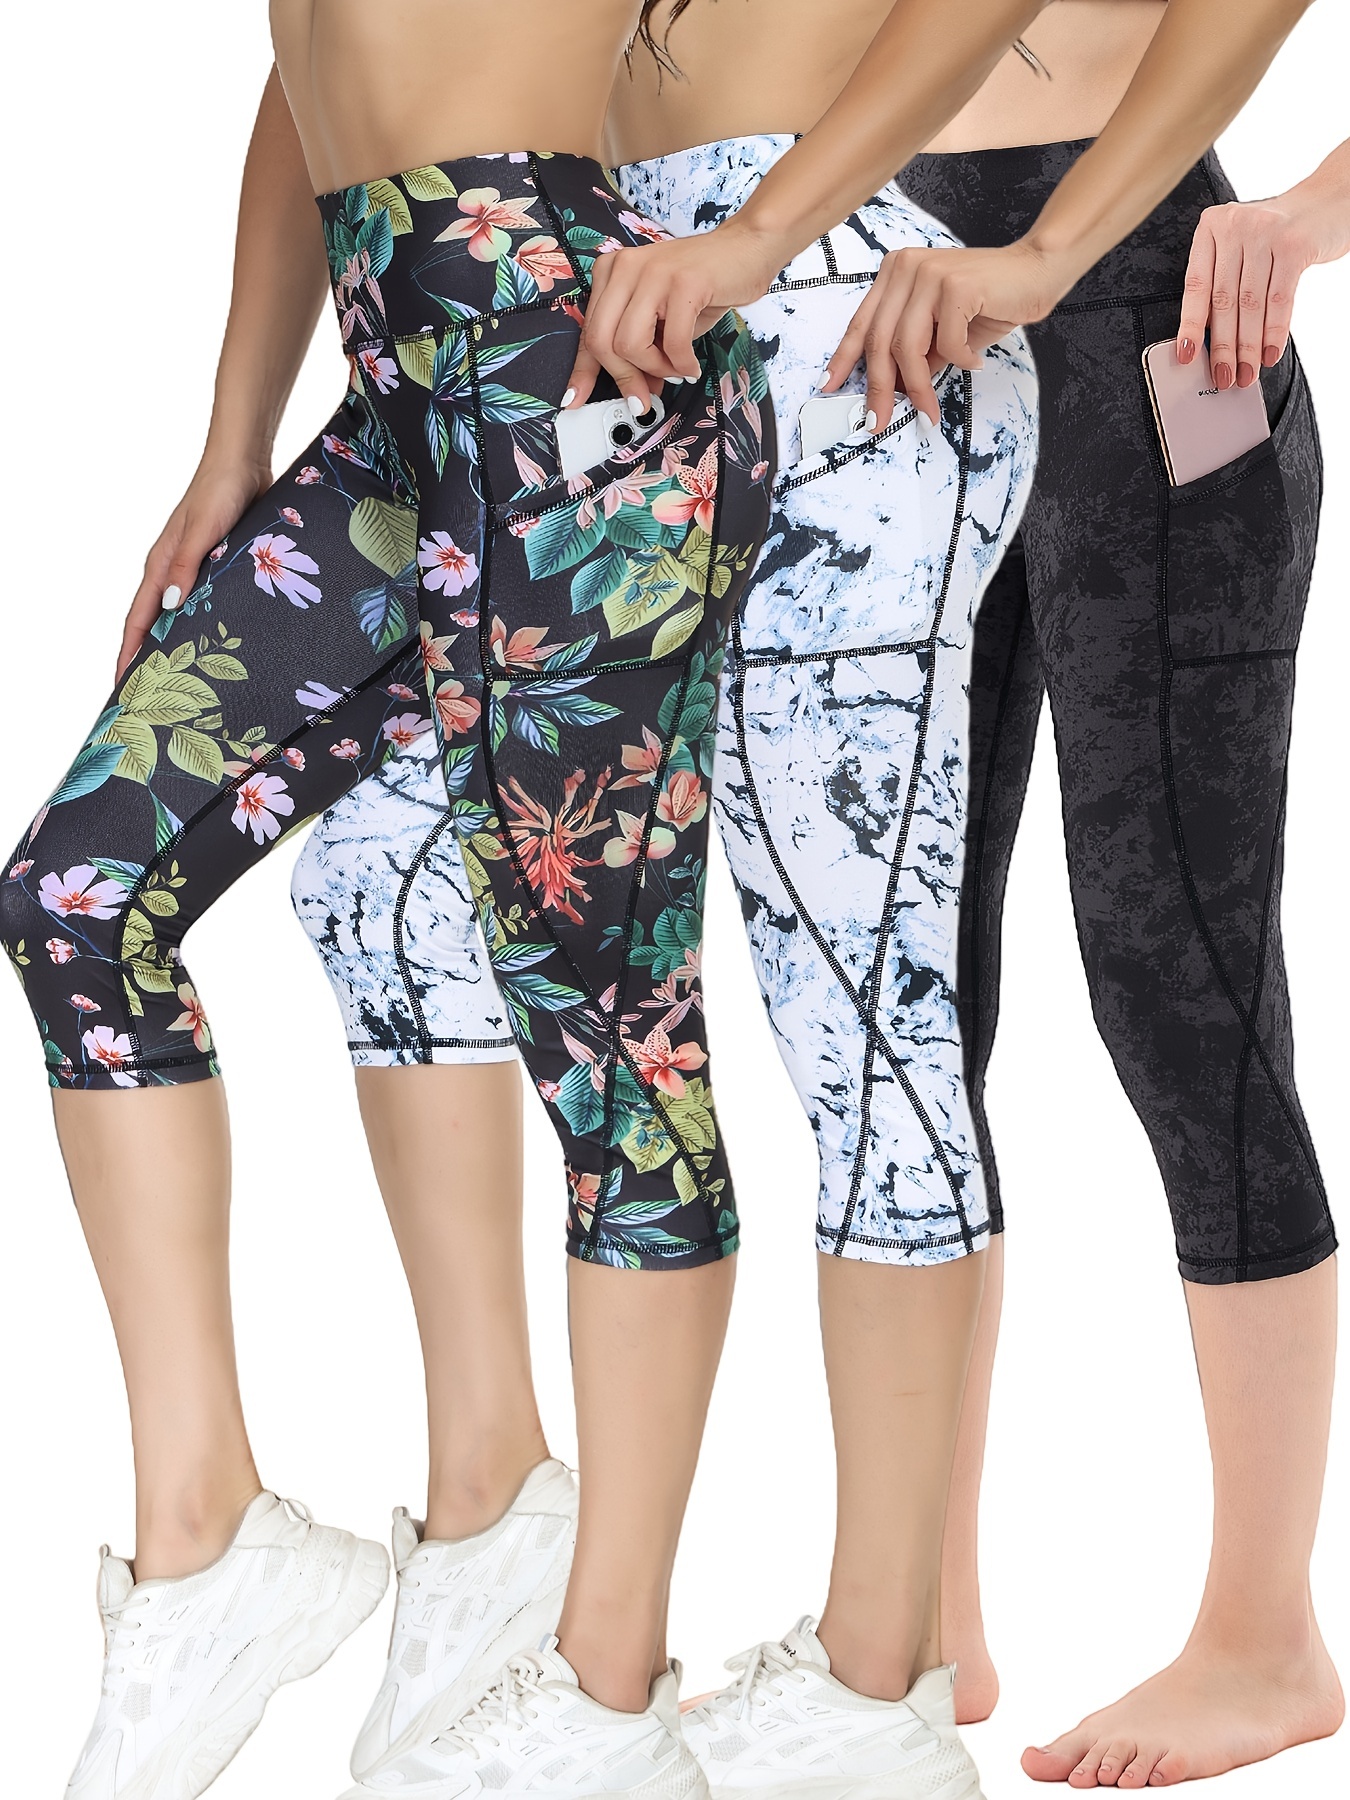 Capreze Capri Leggings for Women with Pockets High Waisted 7/8 Capris Soft  Yoga Pants Workout Running Cycling Tights